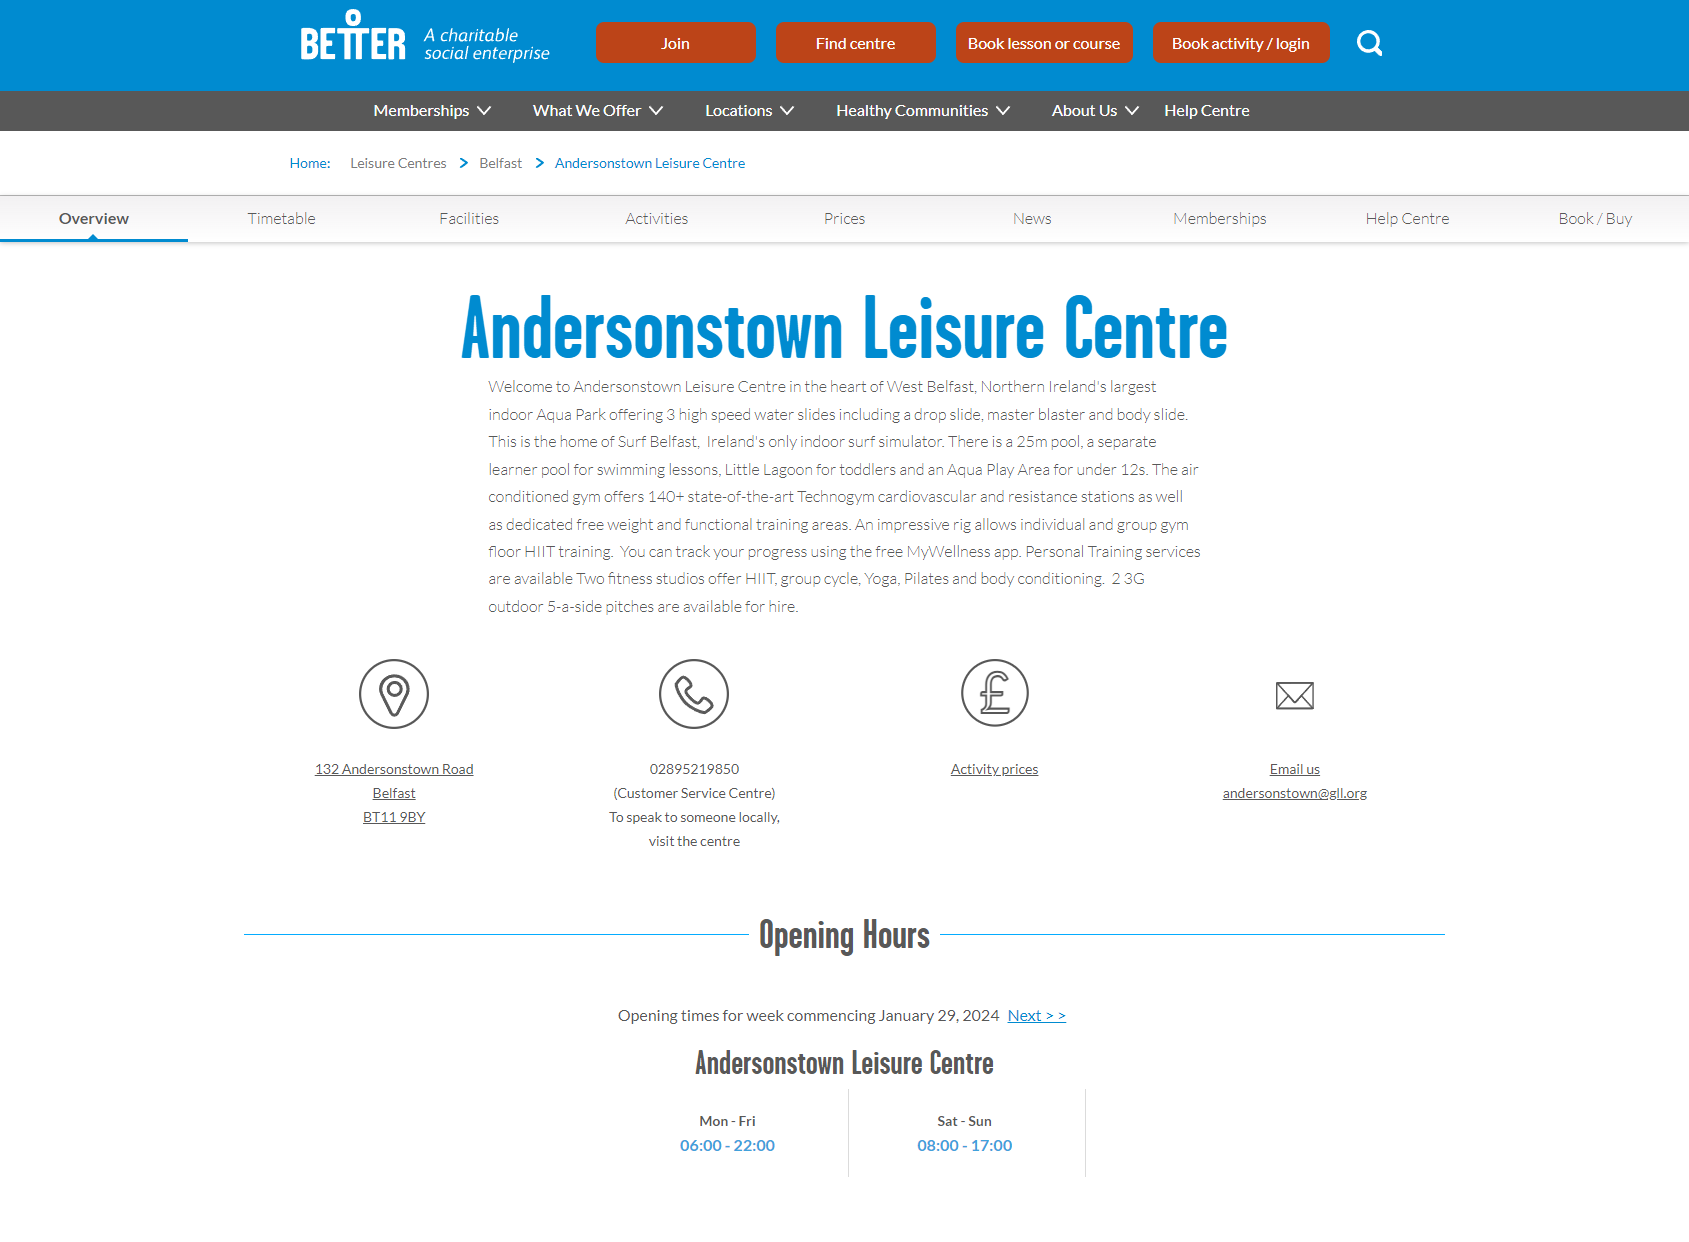 Andersonstown Leisure Centre